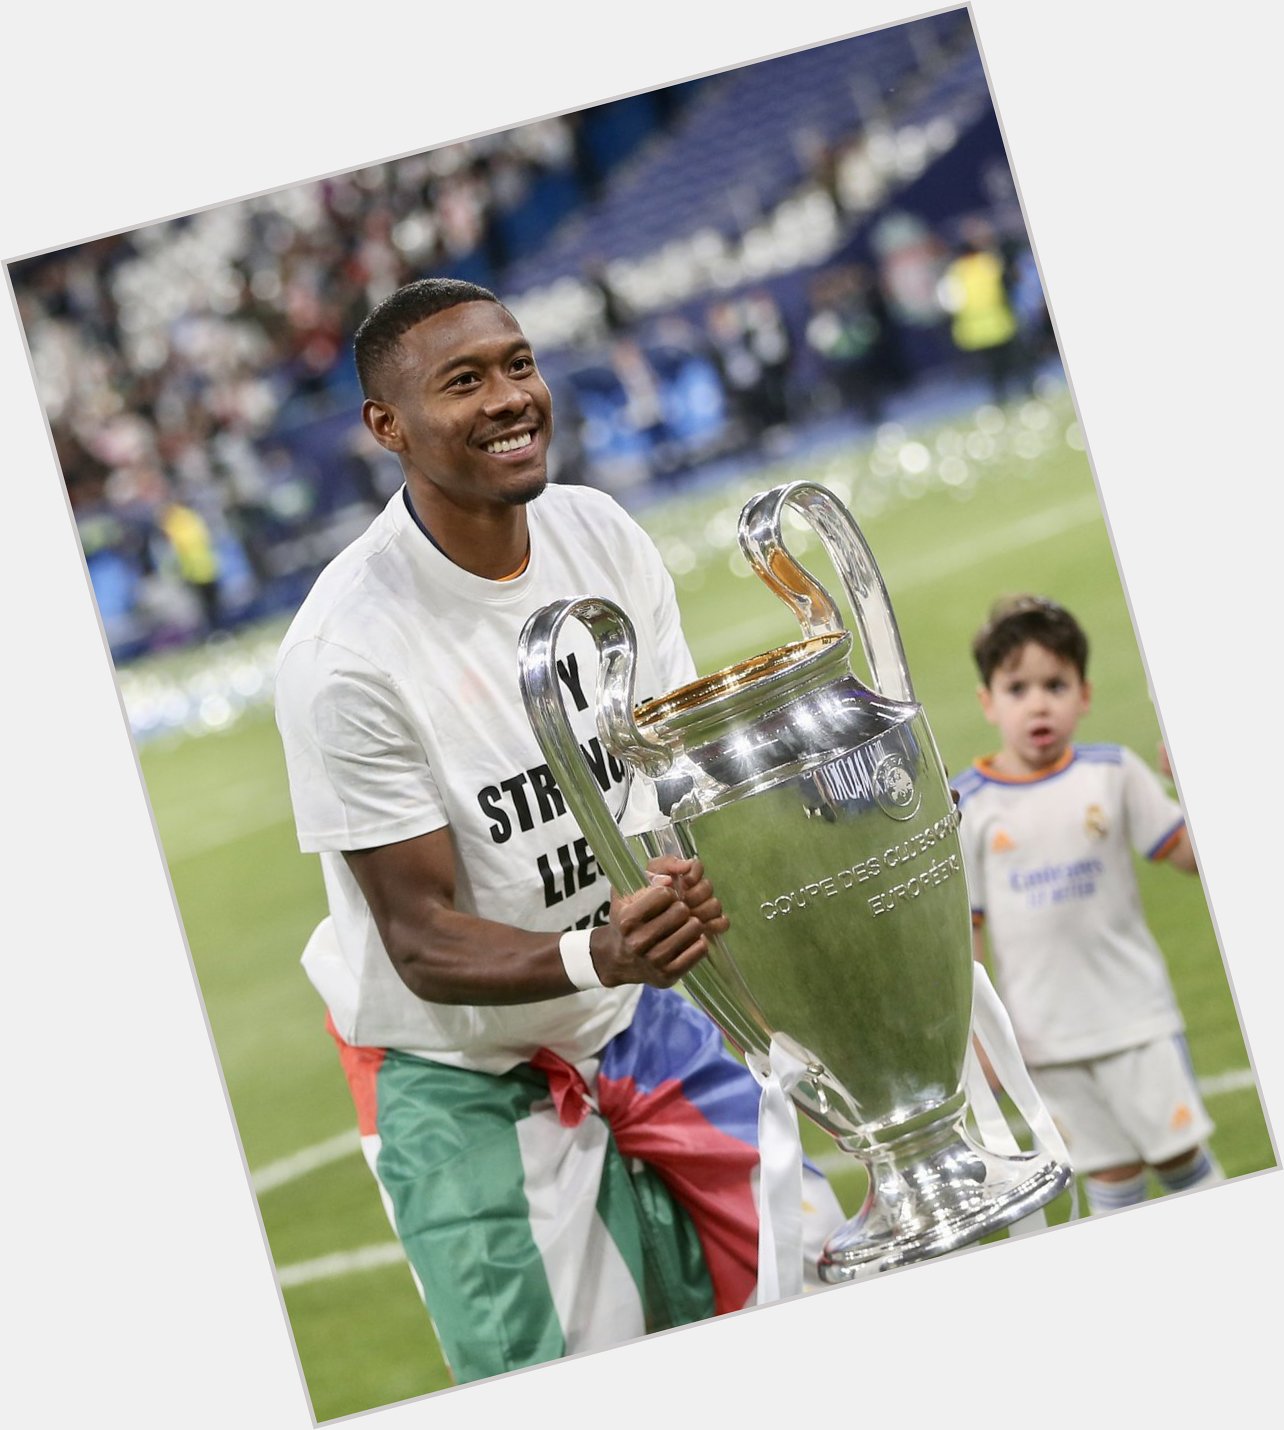 Happy birthday to David Alaba  Have a good one! : Rob Newell - CameraSport (Getty Images) 